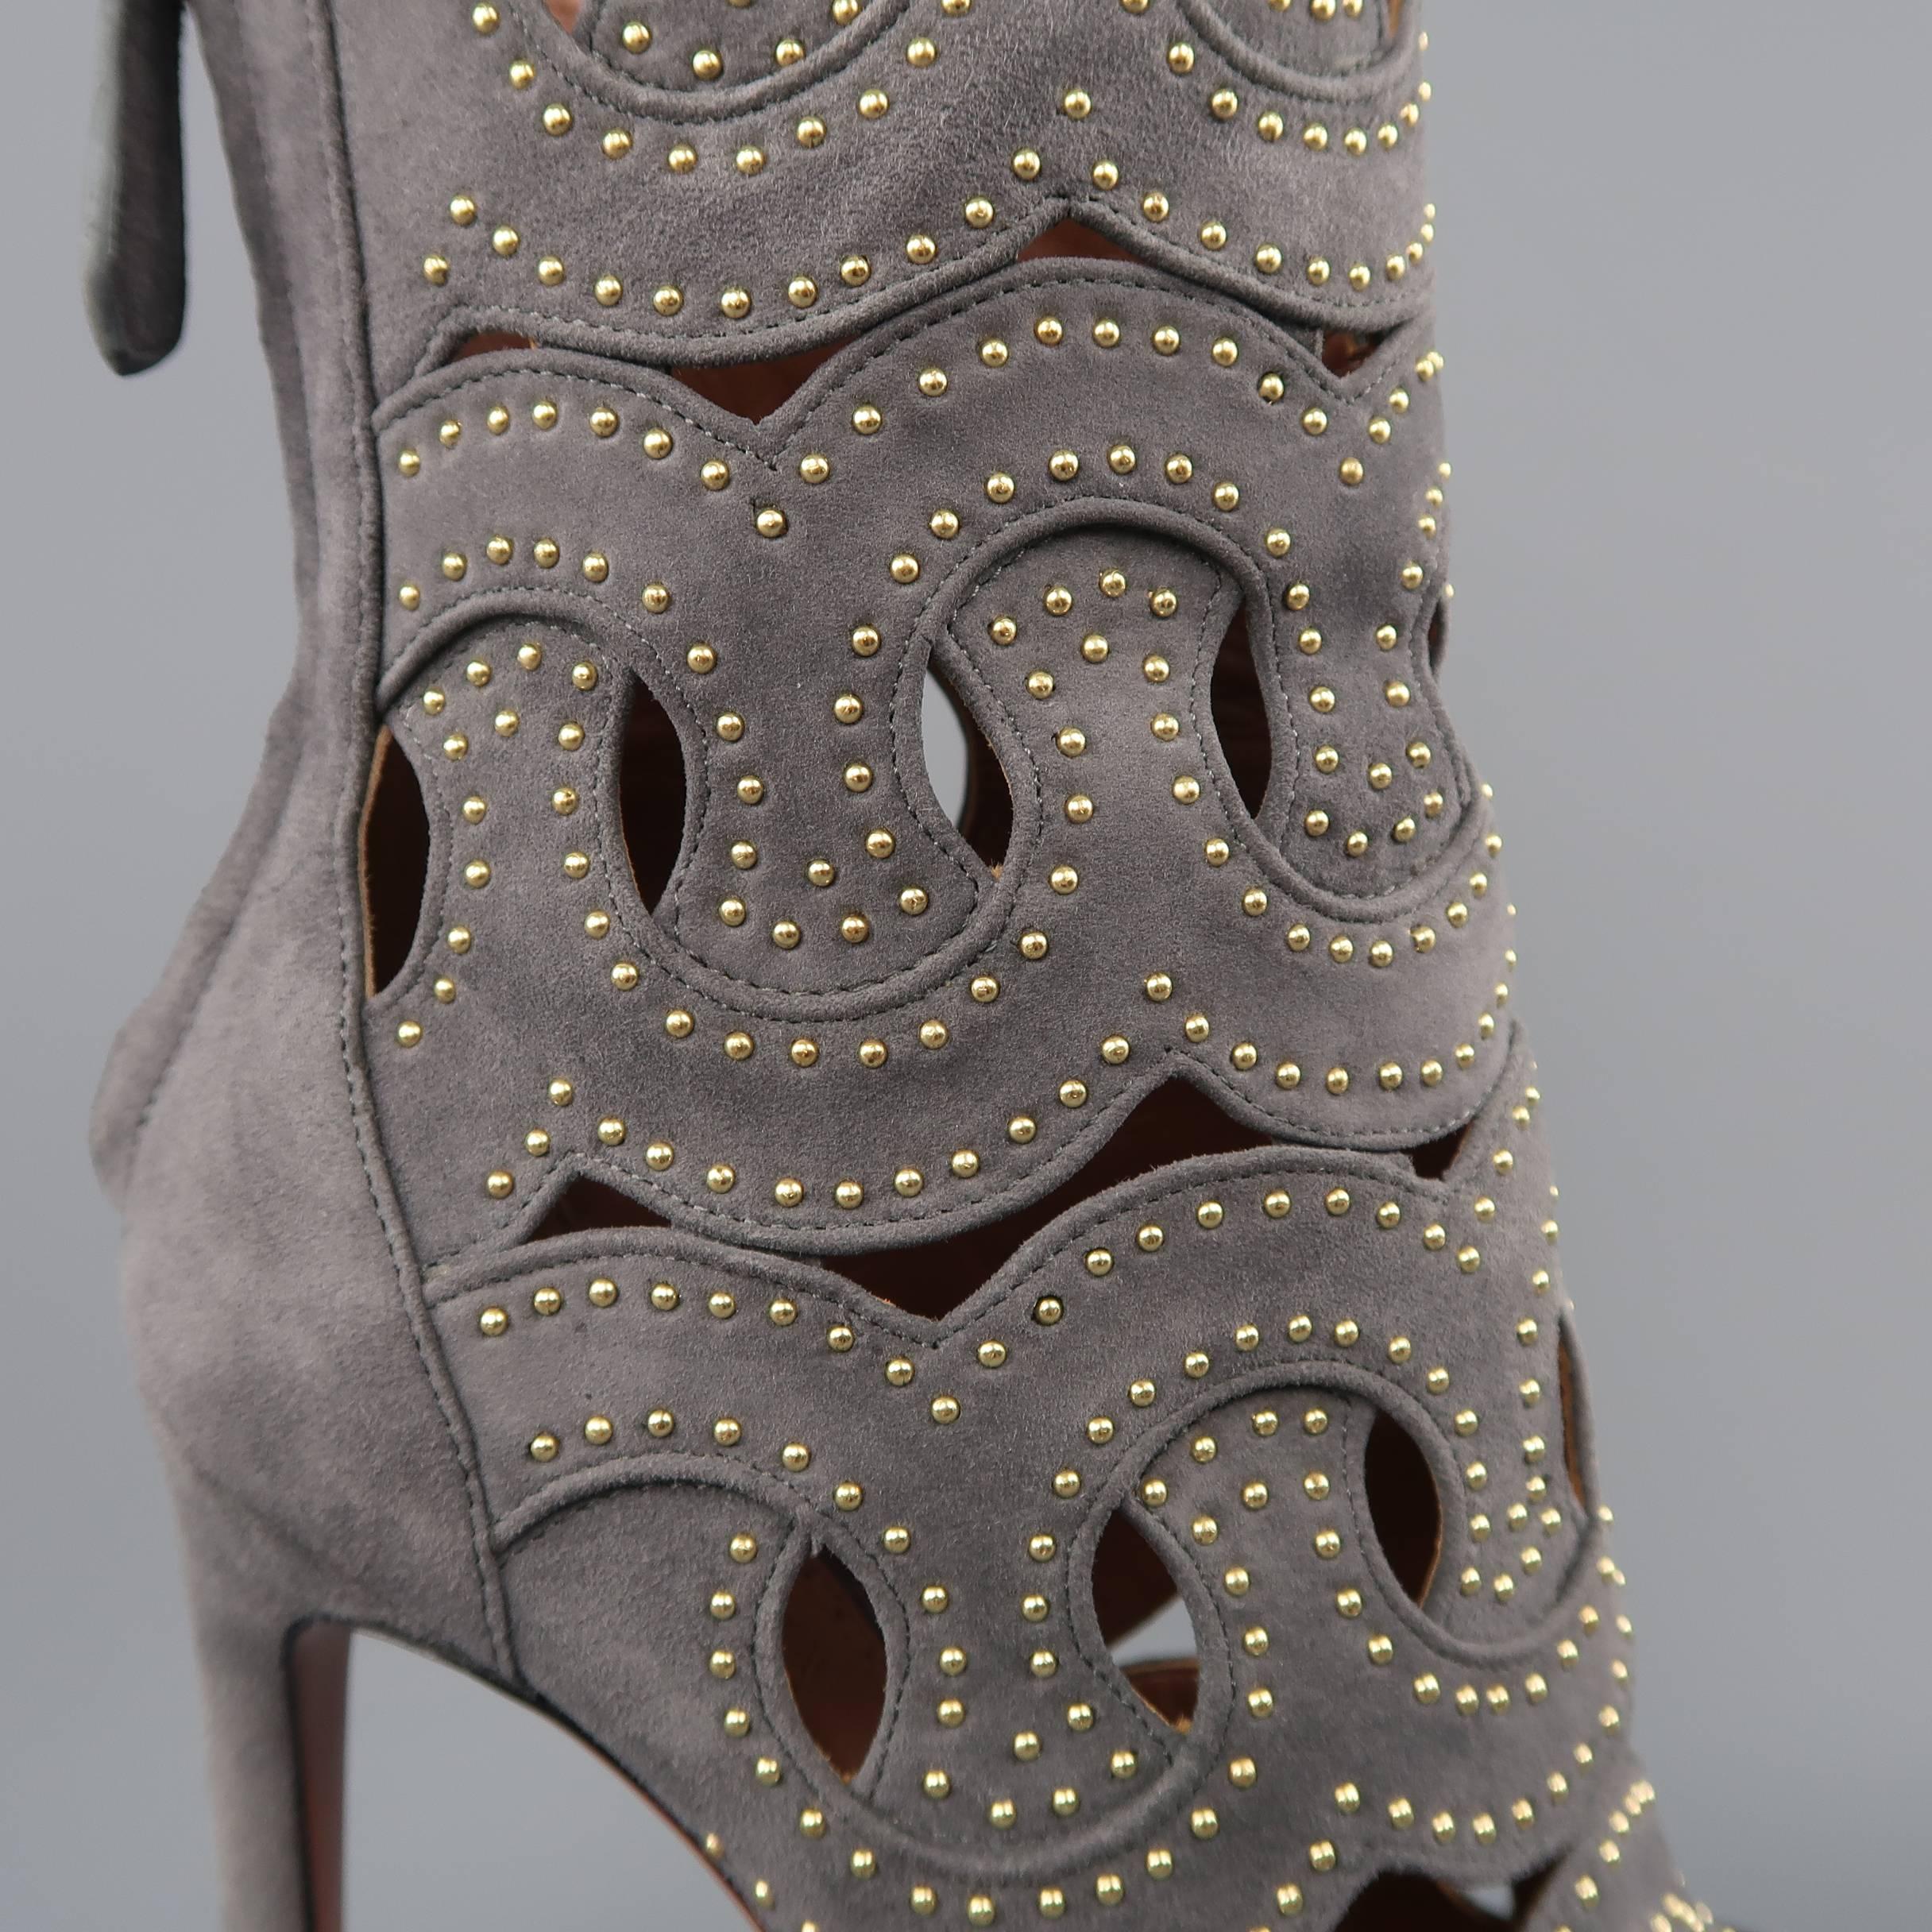 ALAIA ankle boots come in gray suede with woven cutout pattern and gold tone studs throughout, peep toe, and covered stiletto heel. Never worn. Made in Italy.
 
Brand New.
Marked: IT 38.5
 
Measurements:
 
Heel: 4.5 in.
